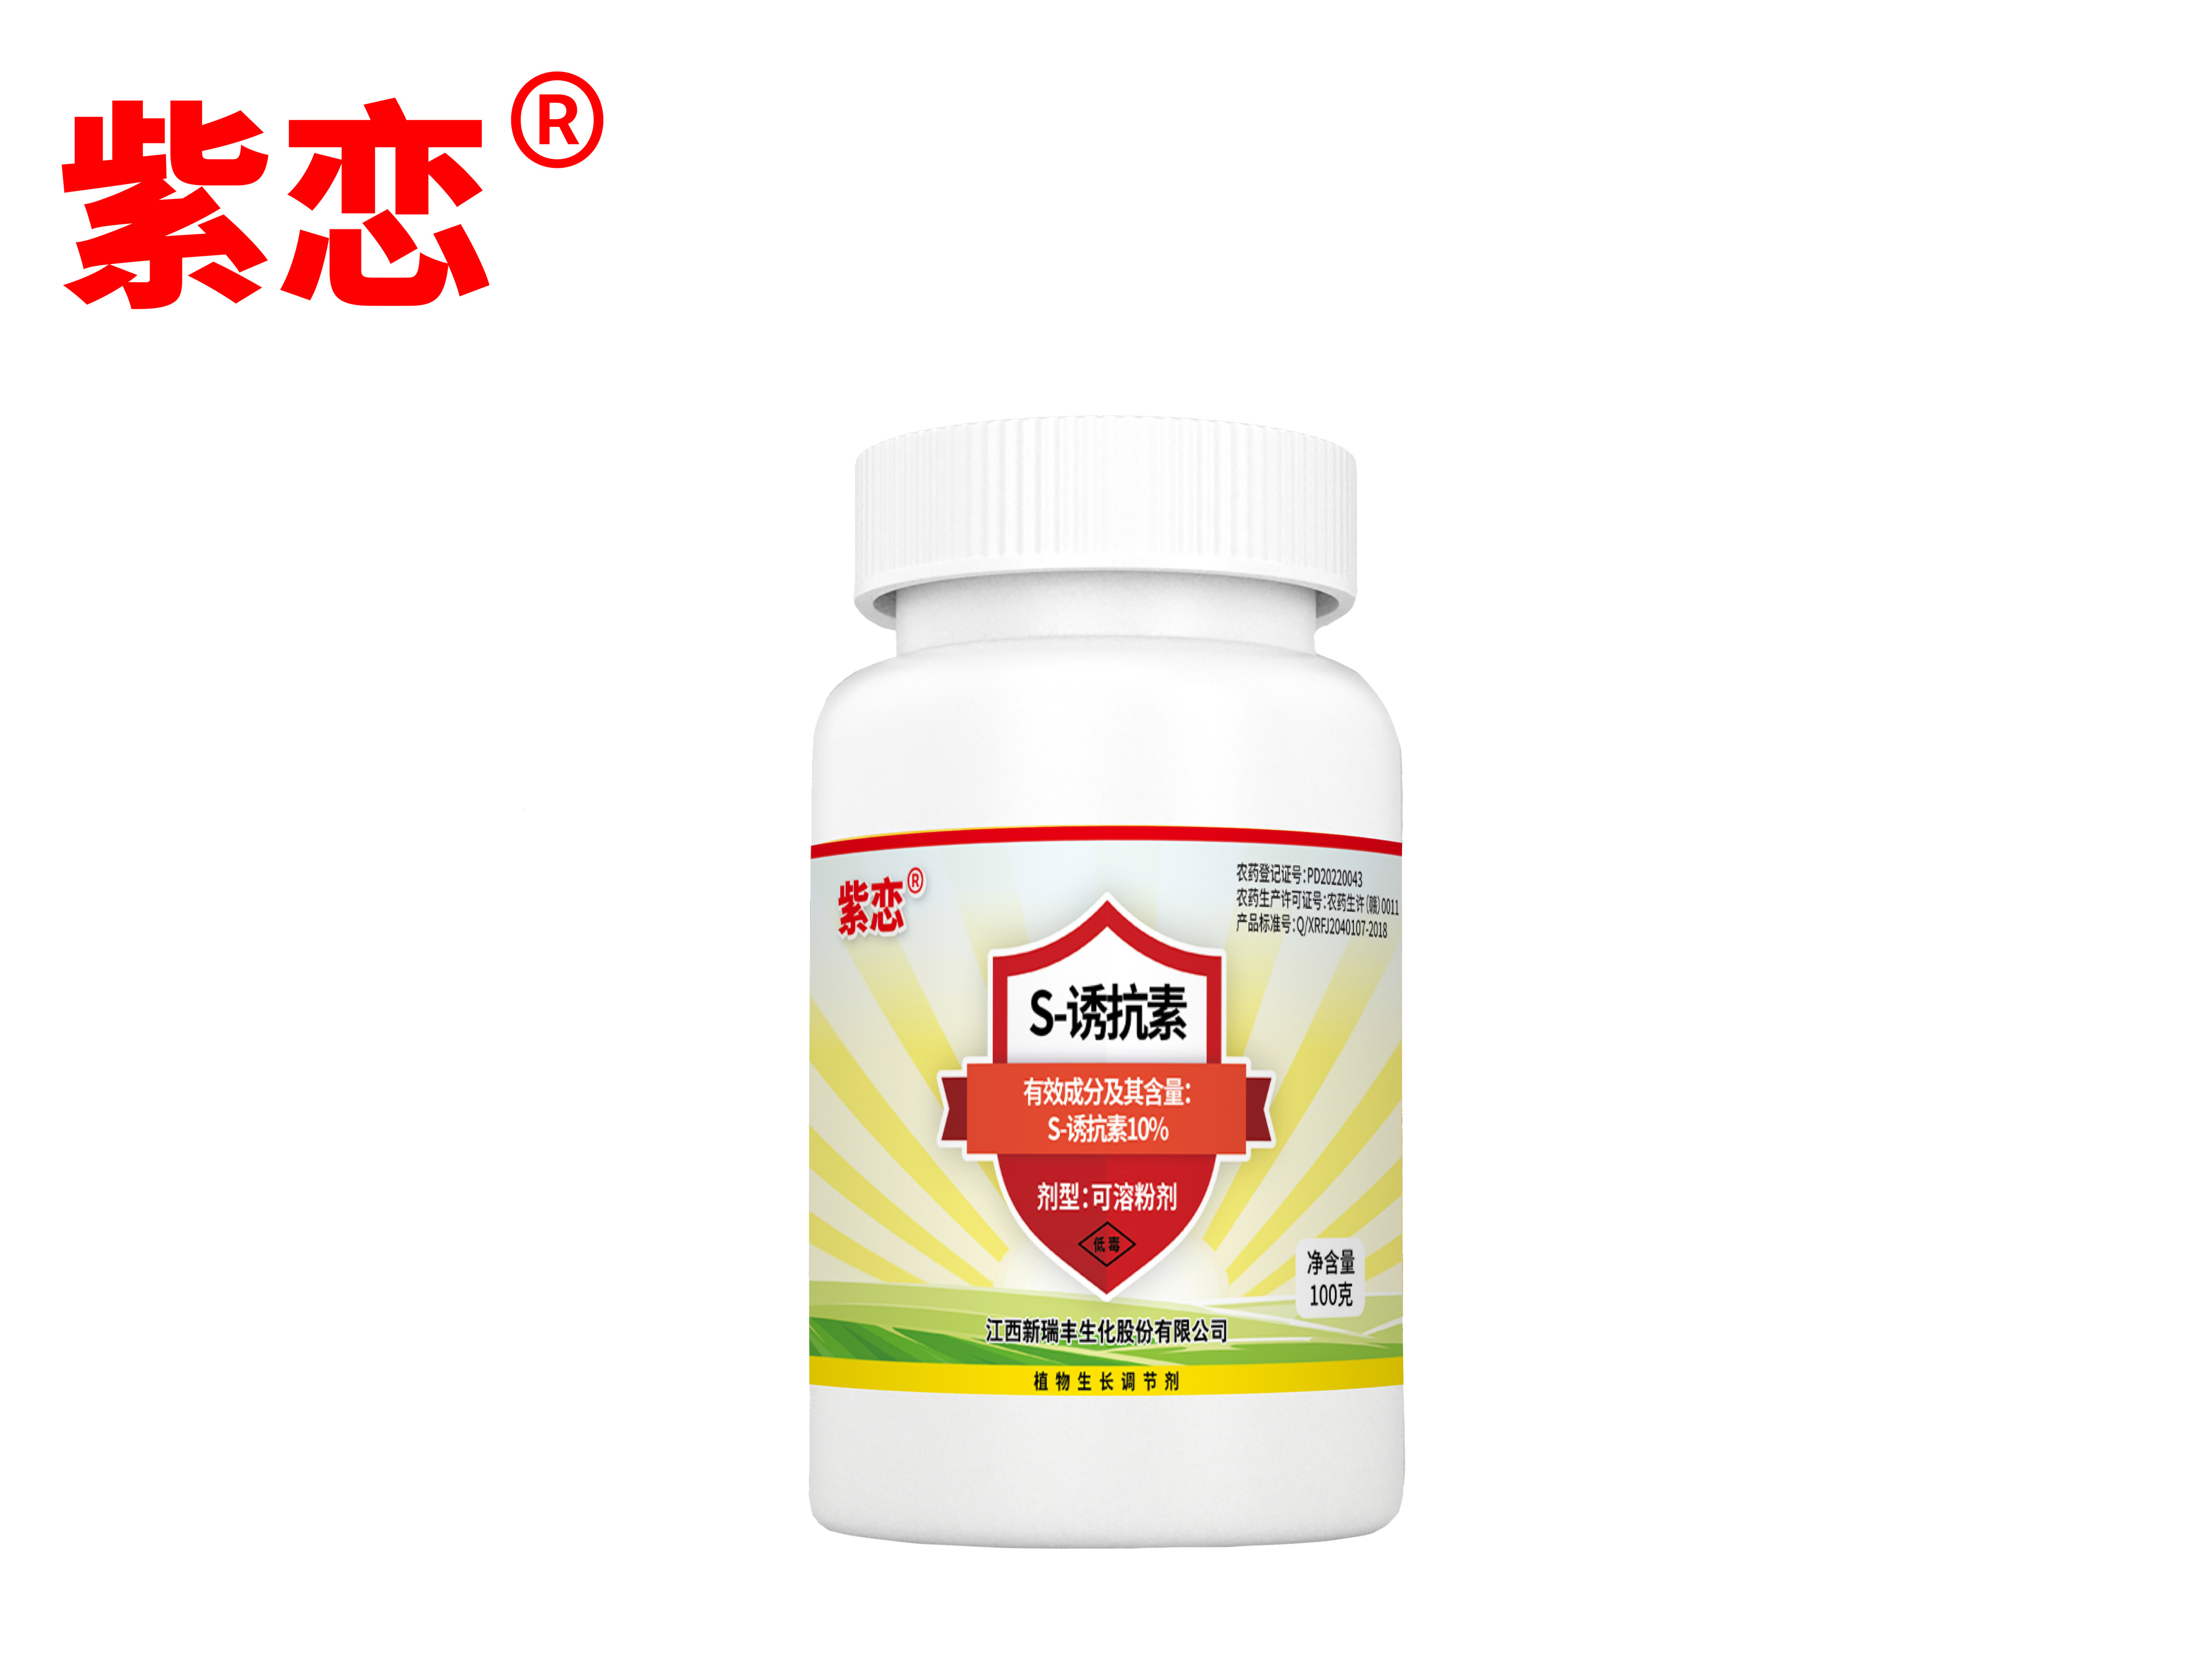 10% S-inducer soluble powder